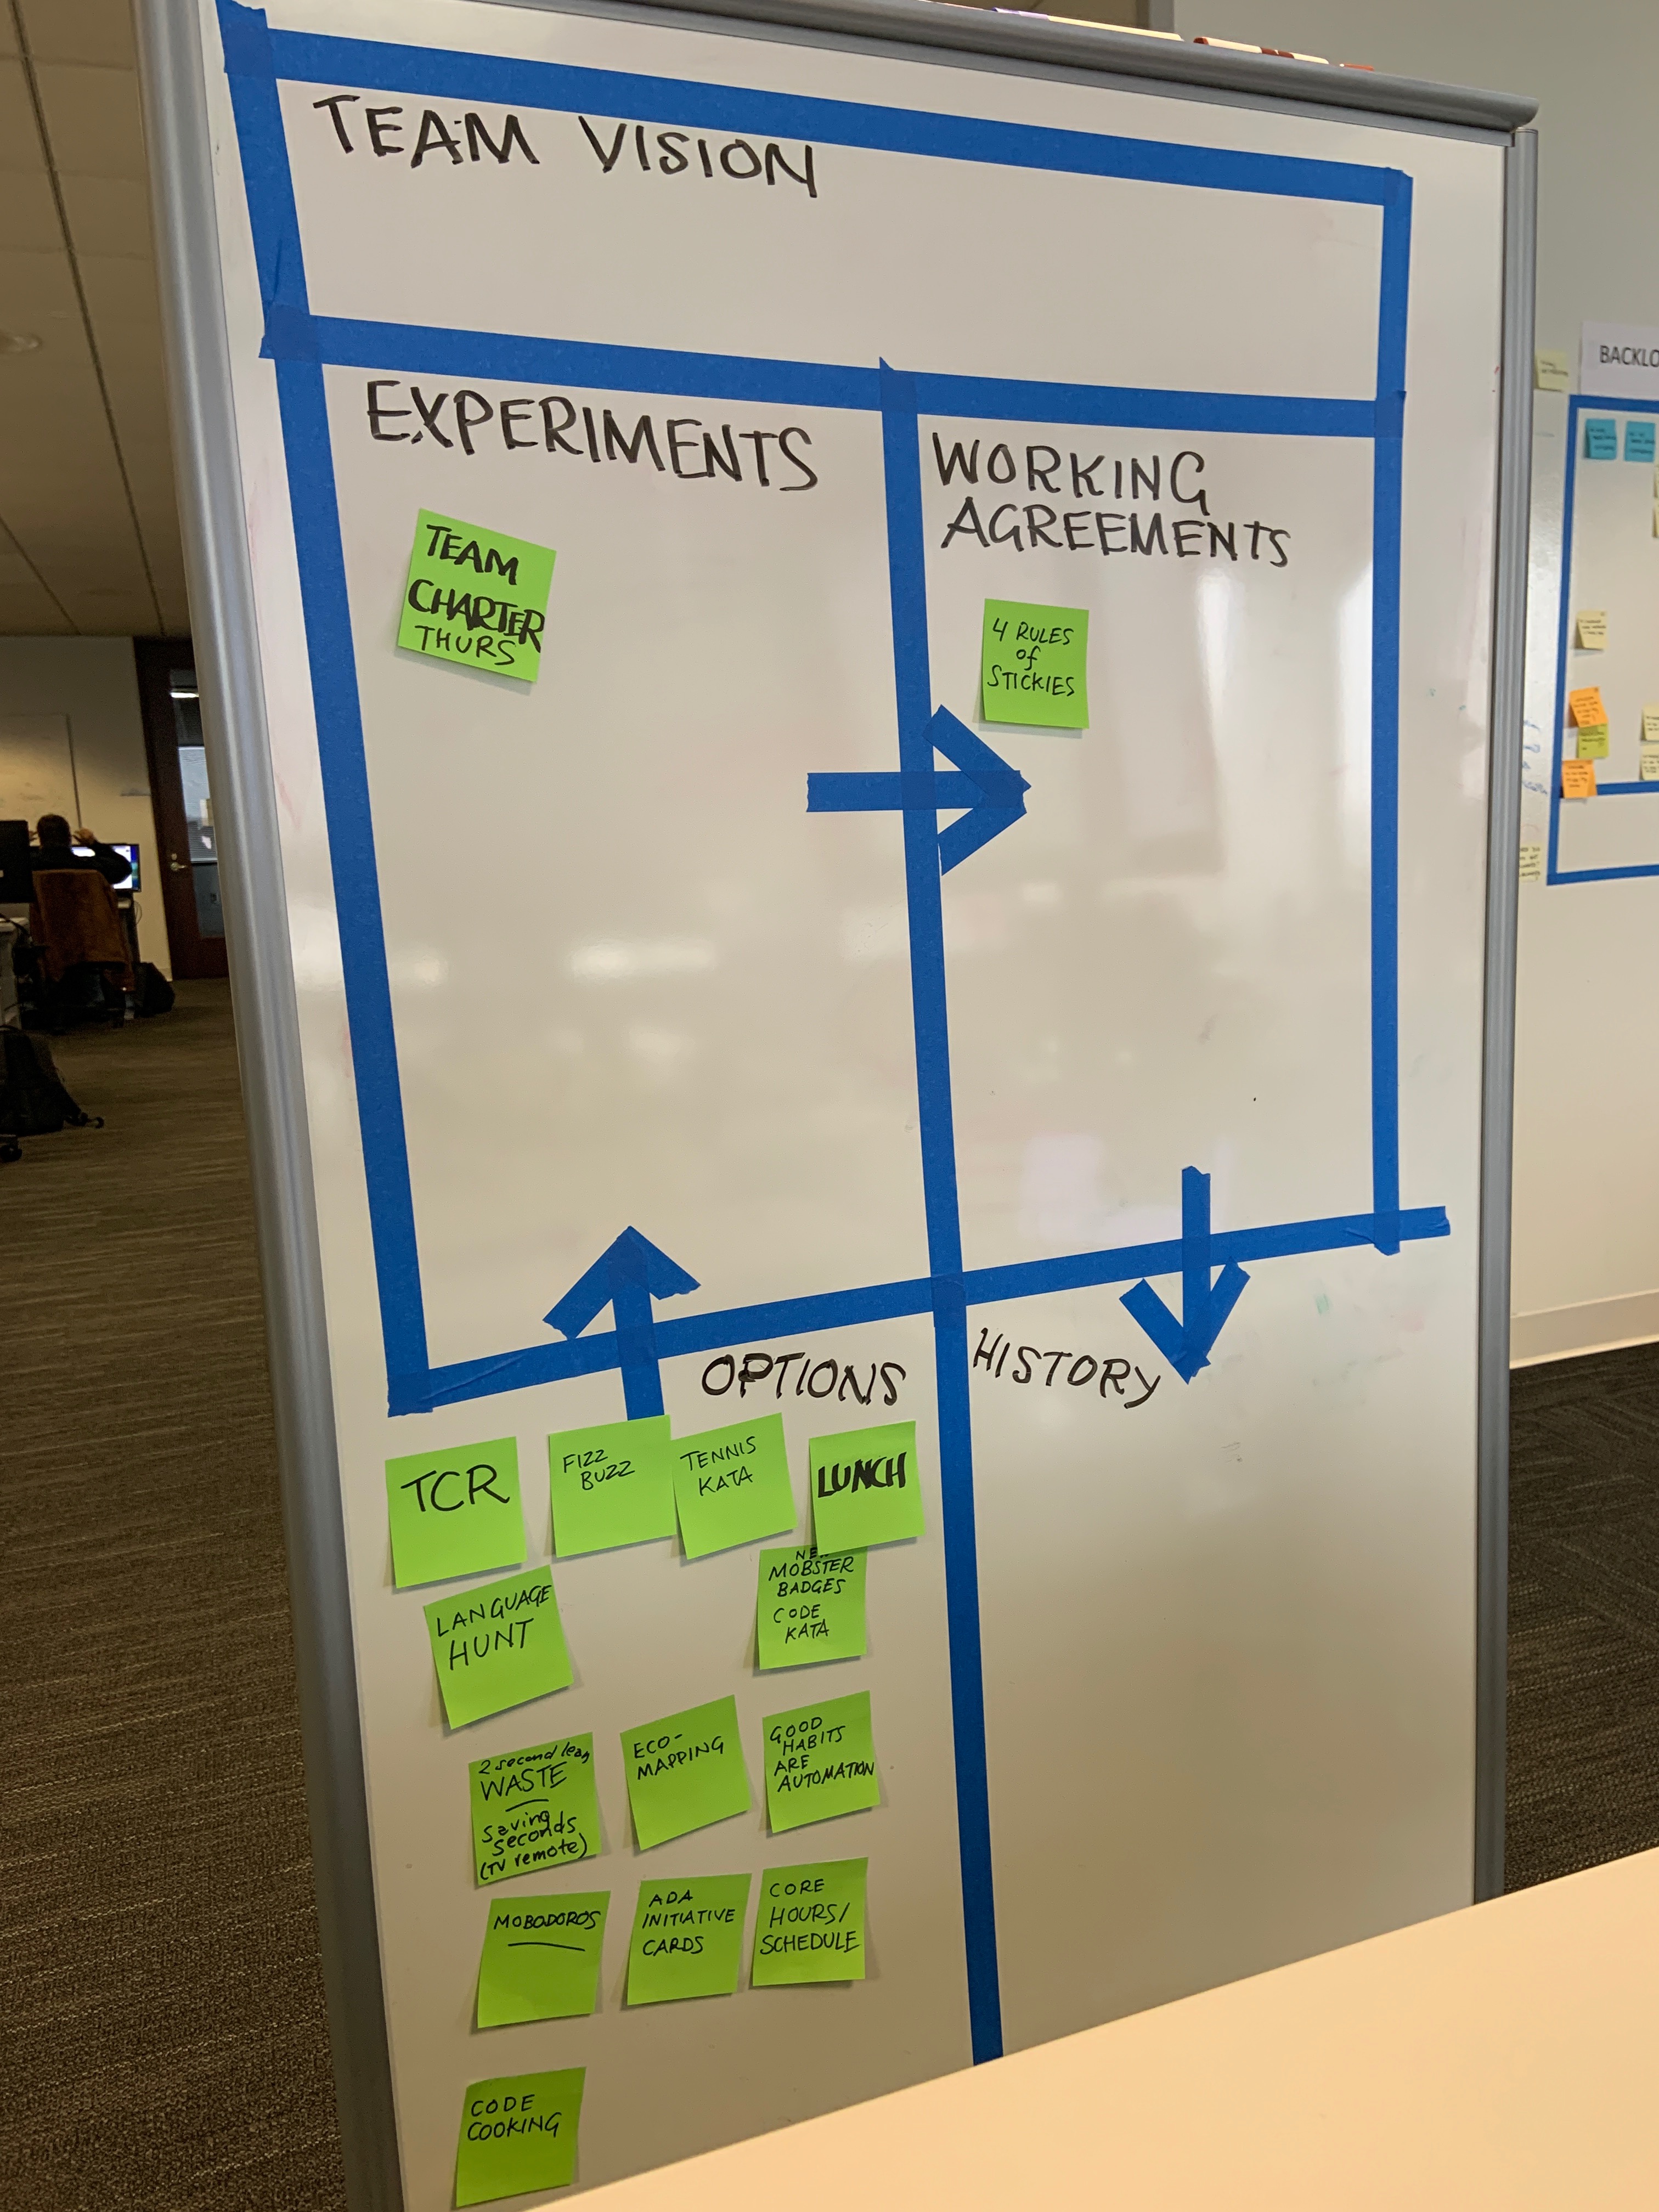 A verticle whiteboard, split into sections (Team Vision, Experiments, Working Agreements), with a green sticky in each, and a bunch of green, single idea stickies uncategorized below.